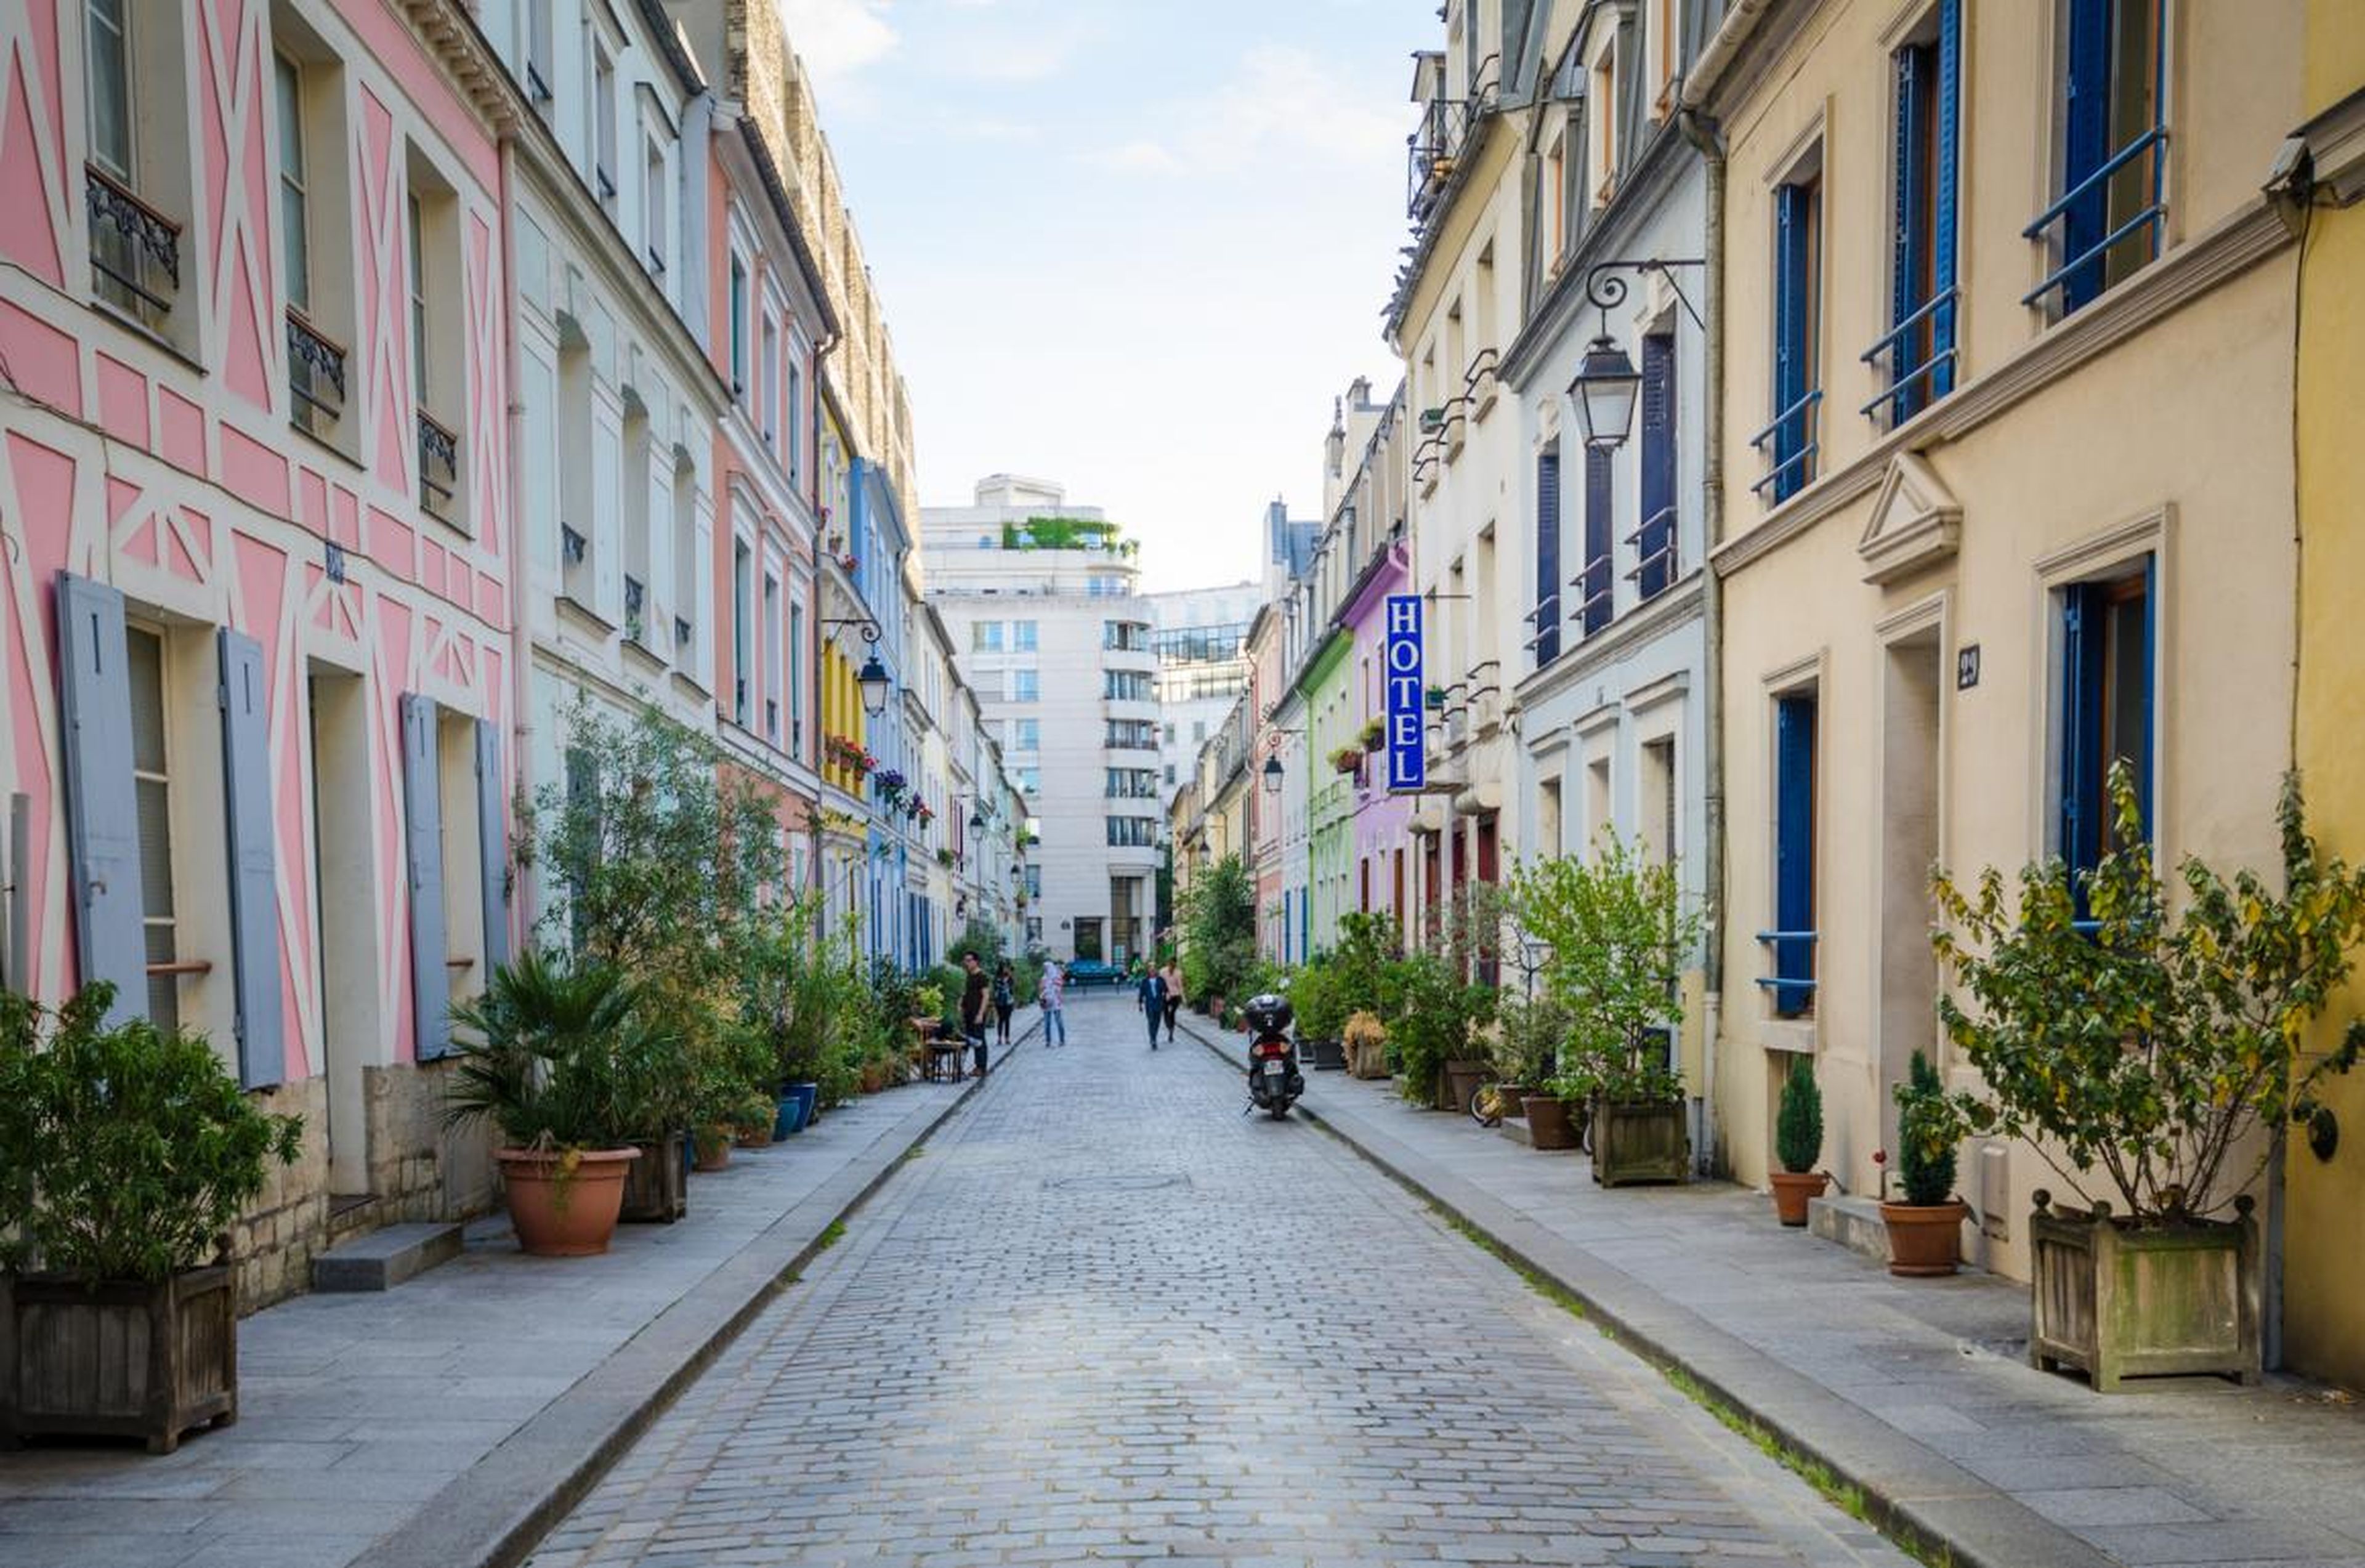 Residents of Rue Crémieux in Paris have requested gates to shut out Instagrammers.